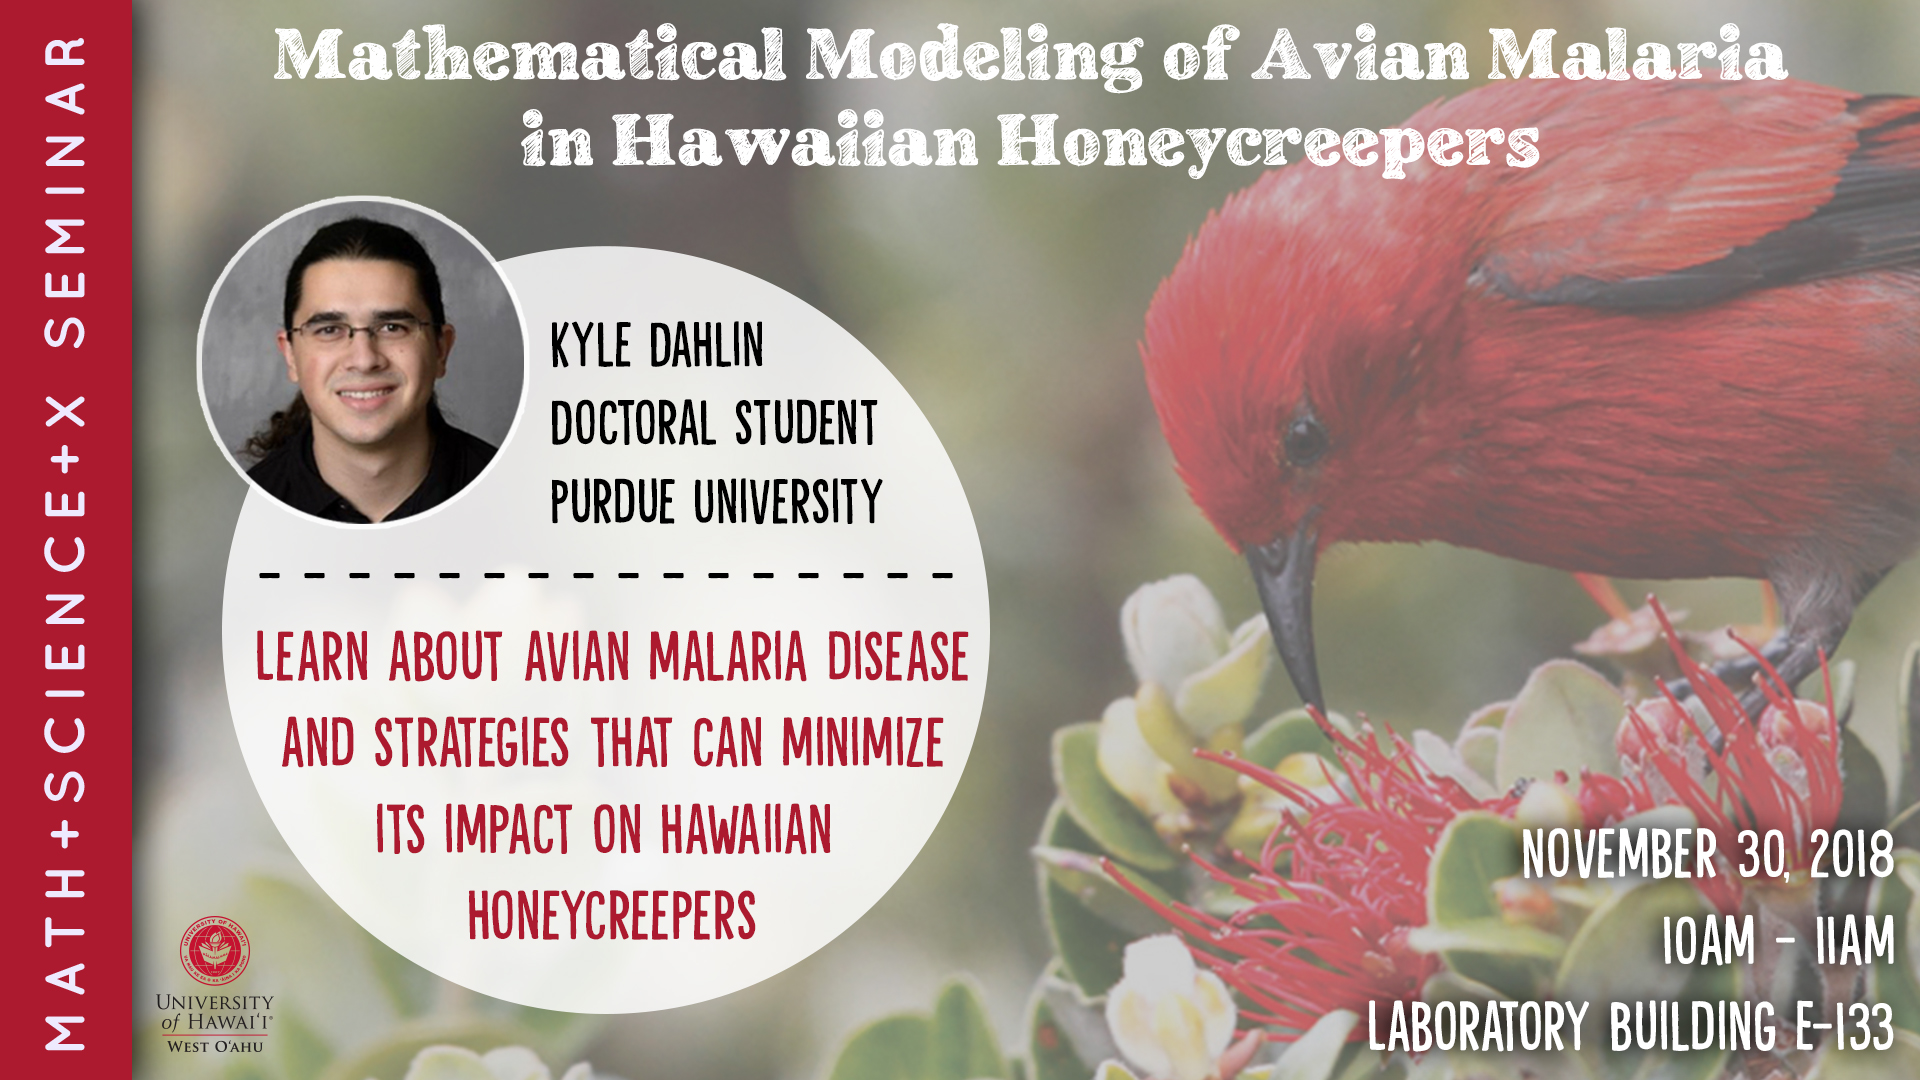 Flier for Avian Malaria seminar with picture of a honeycreeper on an ohia blossom and small photo of Kyle Dahlin along with other information contained in the story